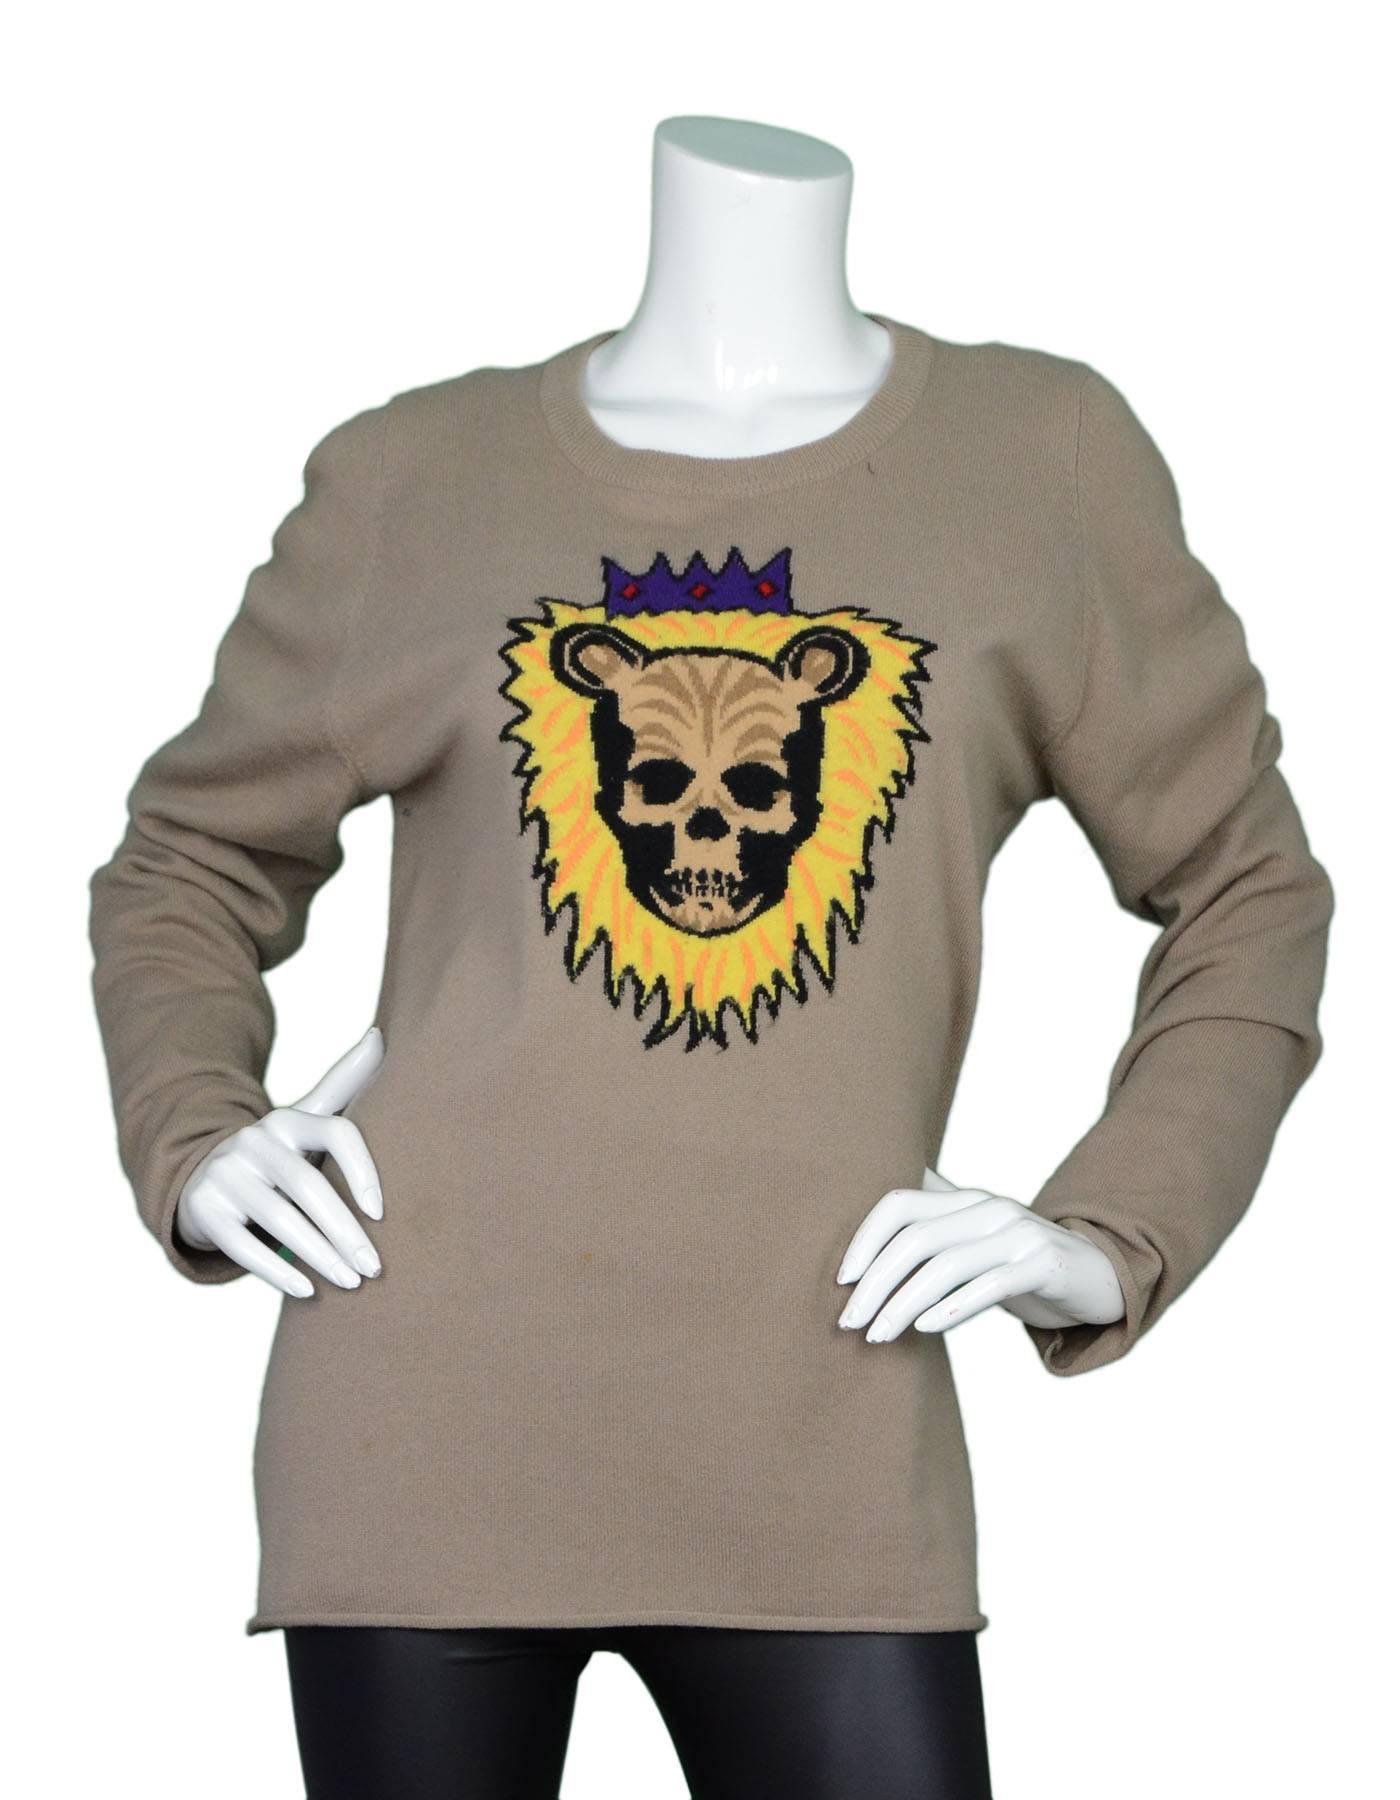 Lucien Pellat-Finet Tan Cashmere Sweater 
Features lion skull with mane printed on front
Made In: Scotland
Color: Tan and multi-colored
Composition: 100% cashmere
Lining: None
Closure/Opening: Pull over
Exterior Pockets: None
Interior